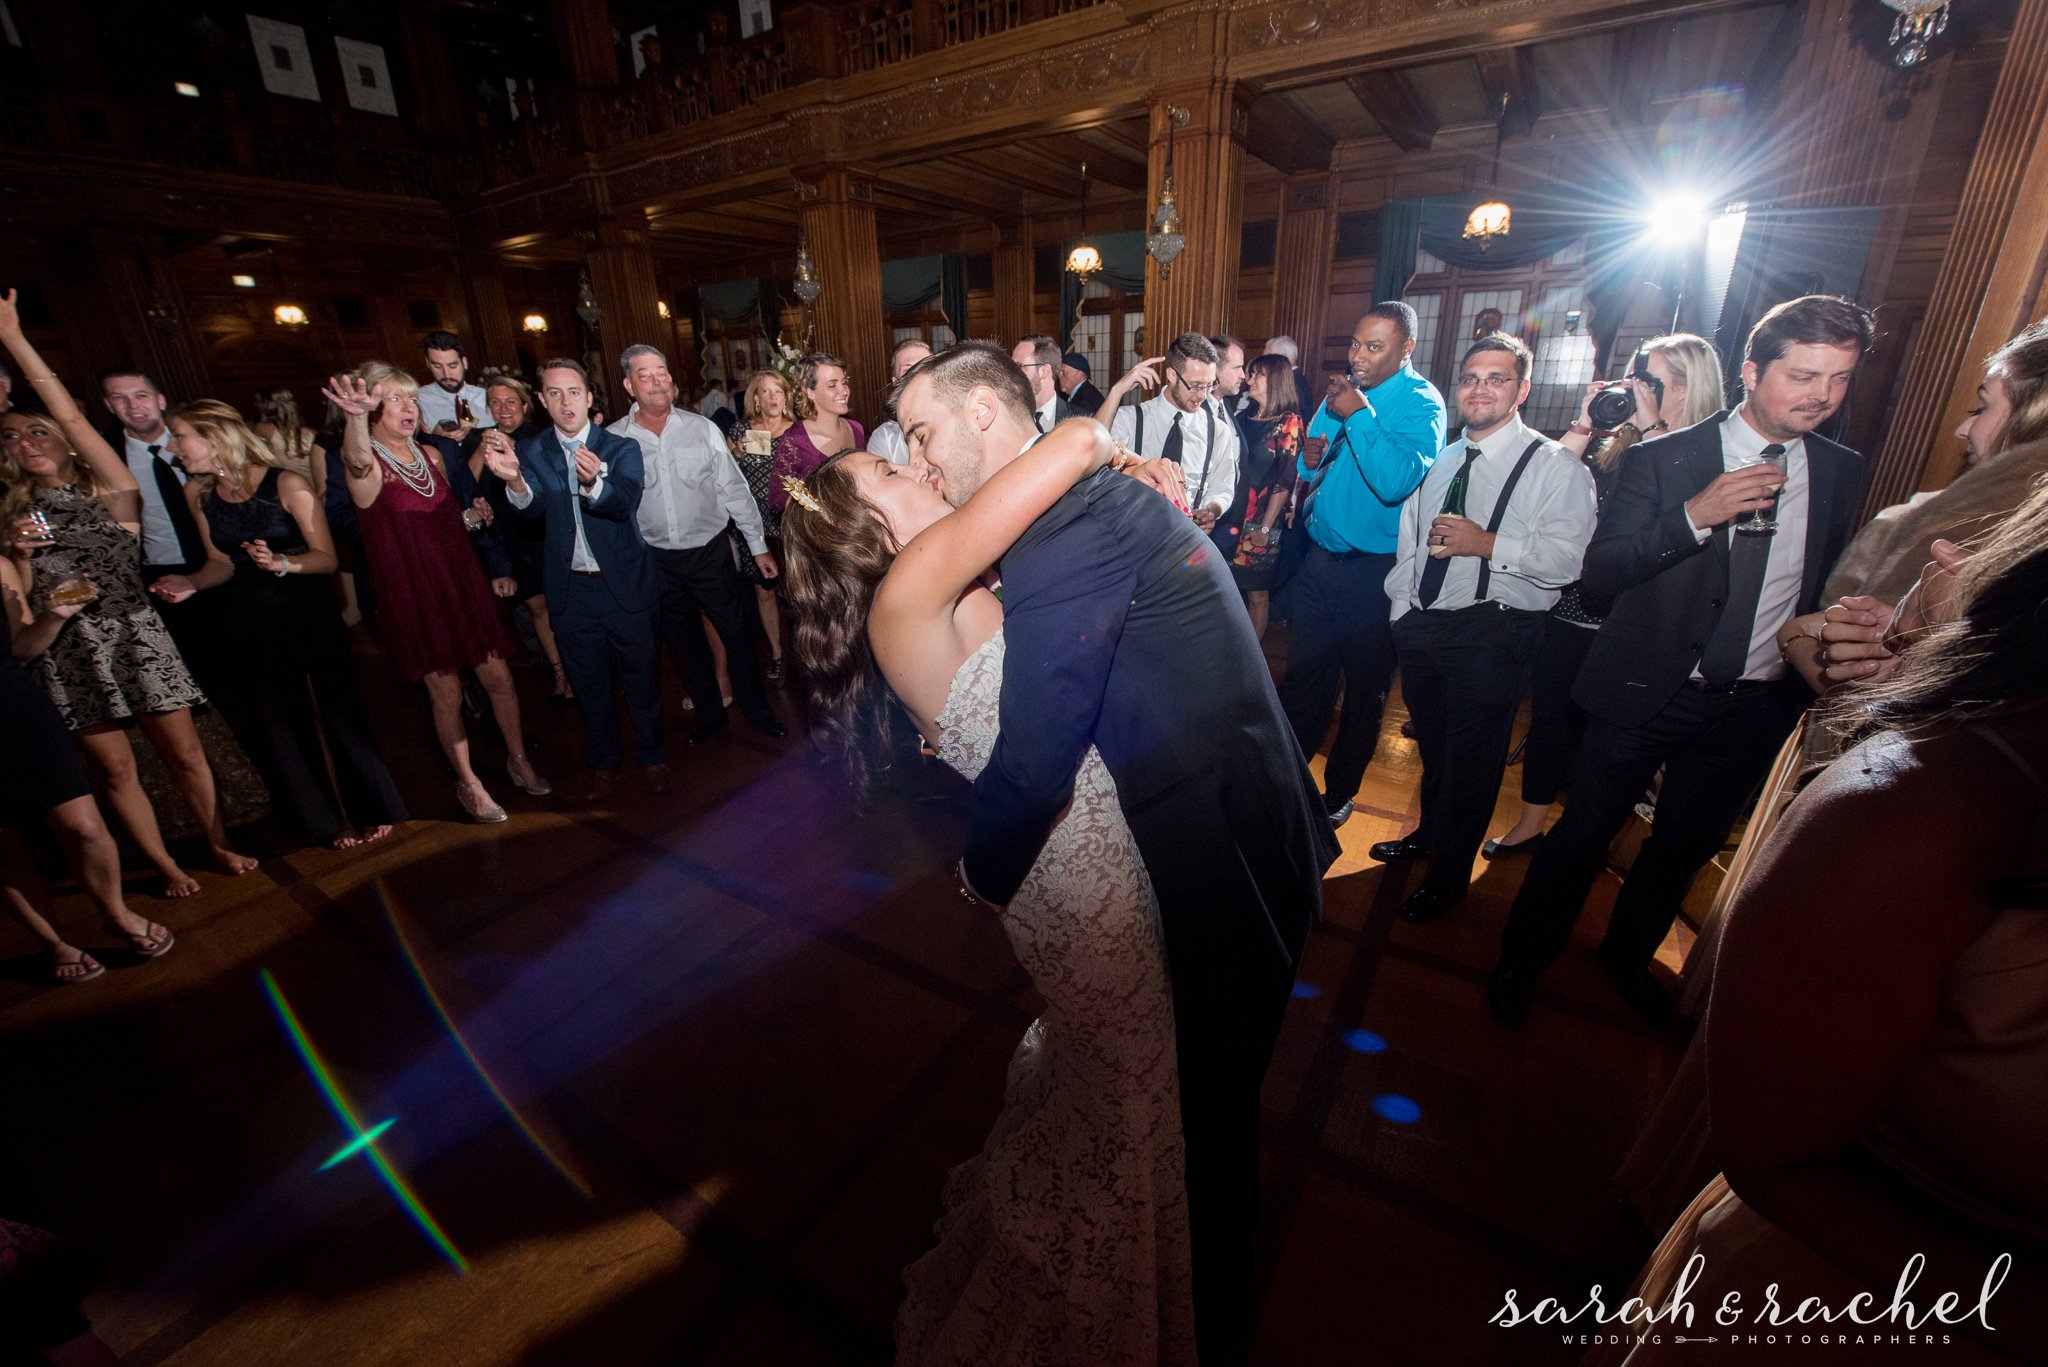 Scottish Rite Cathedral | Gold wedding details | Classy gold wedding